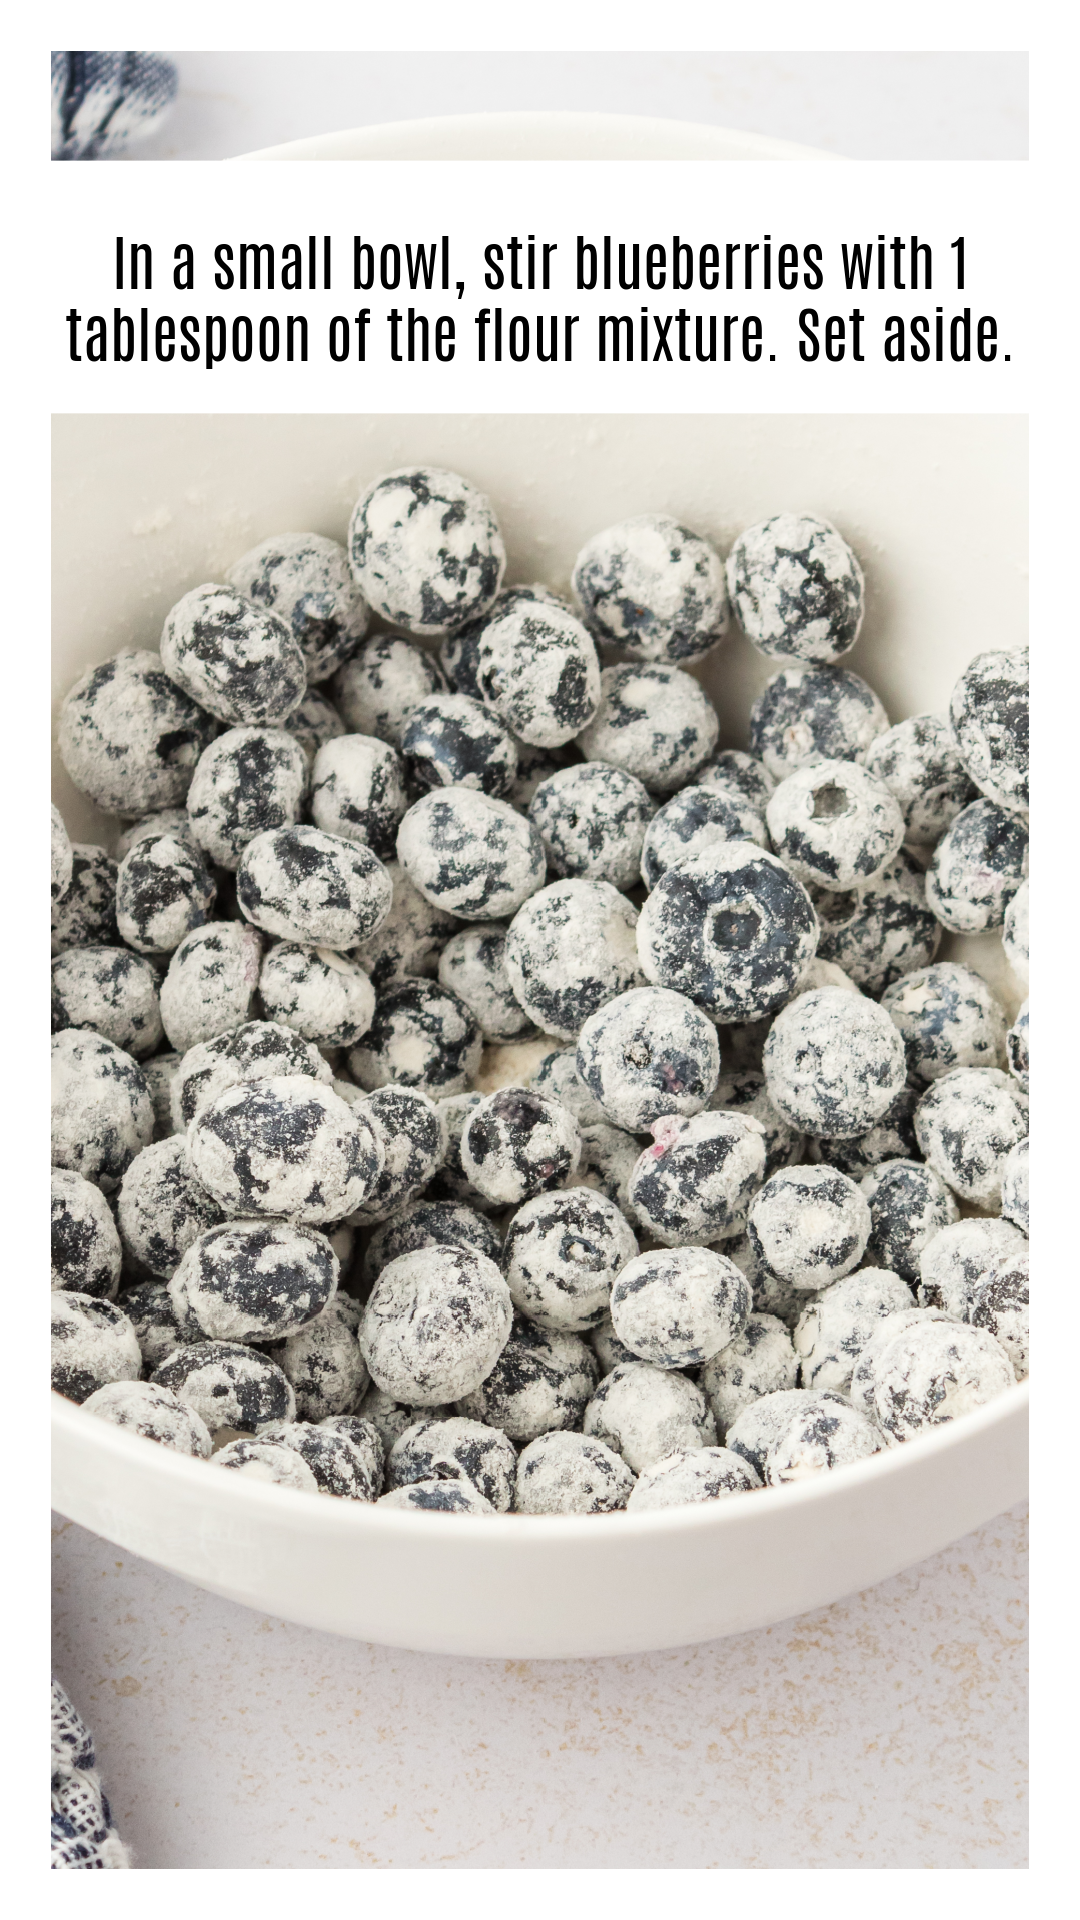 bowl of blueberries tossed in flour